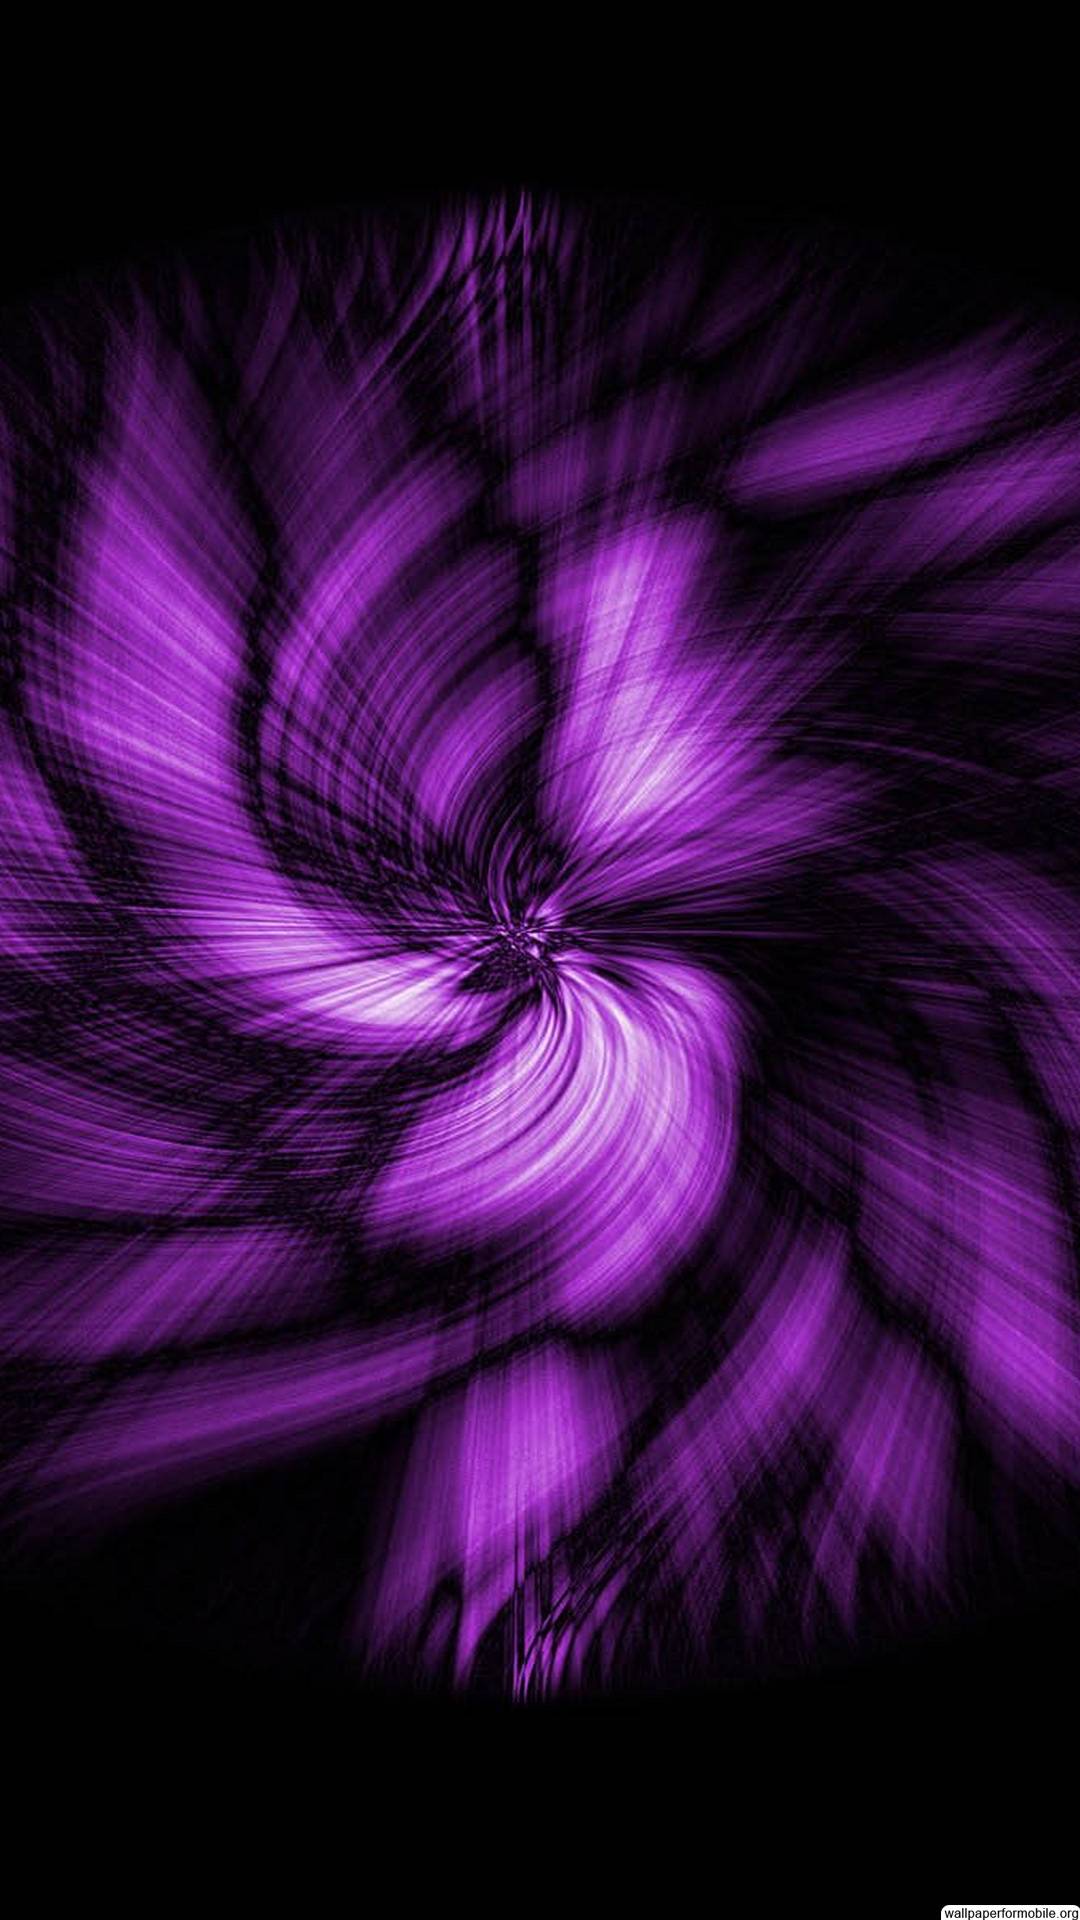 Black and Purple Abstract Wallpapers - Top Free Black and Purple ...